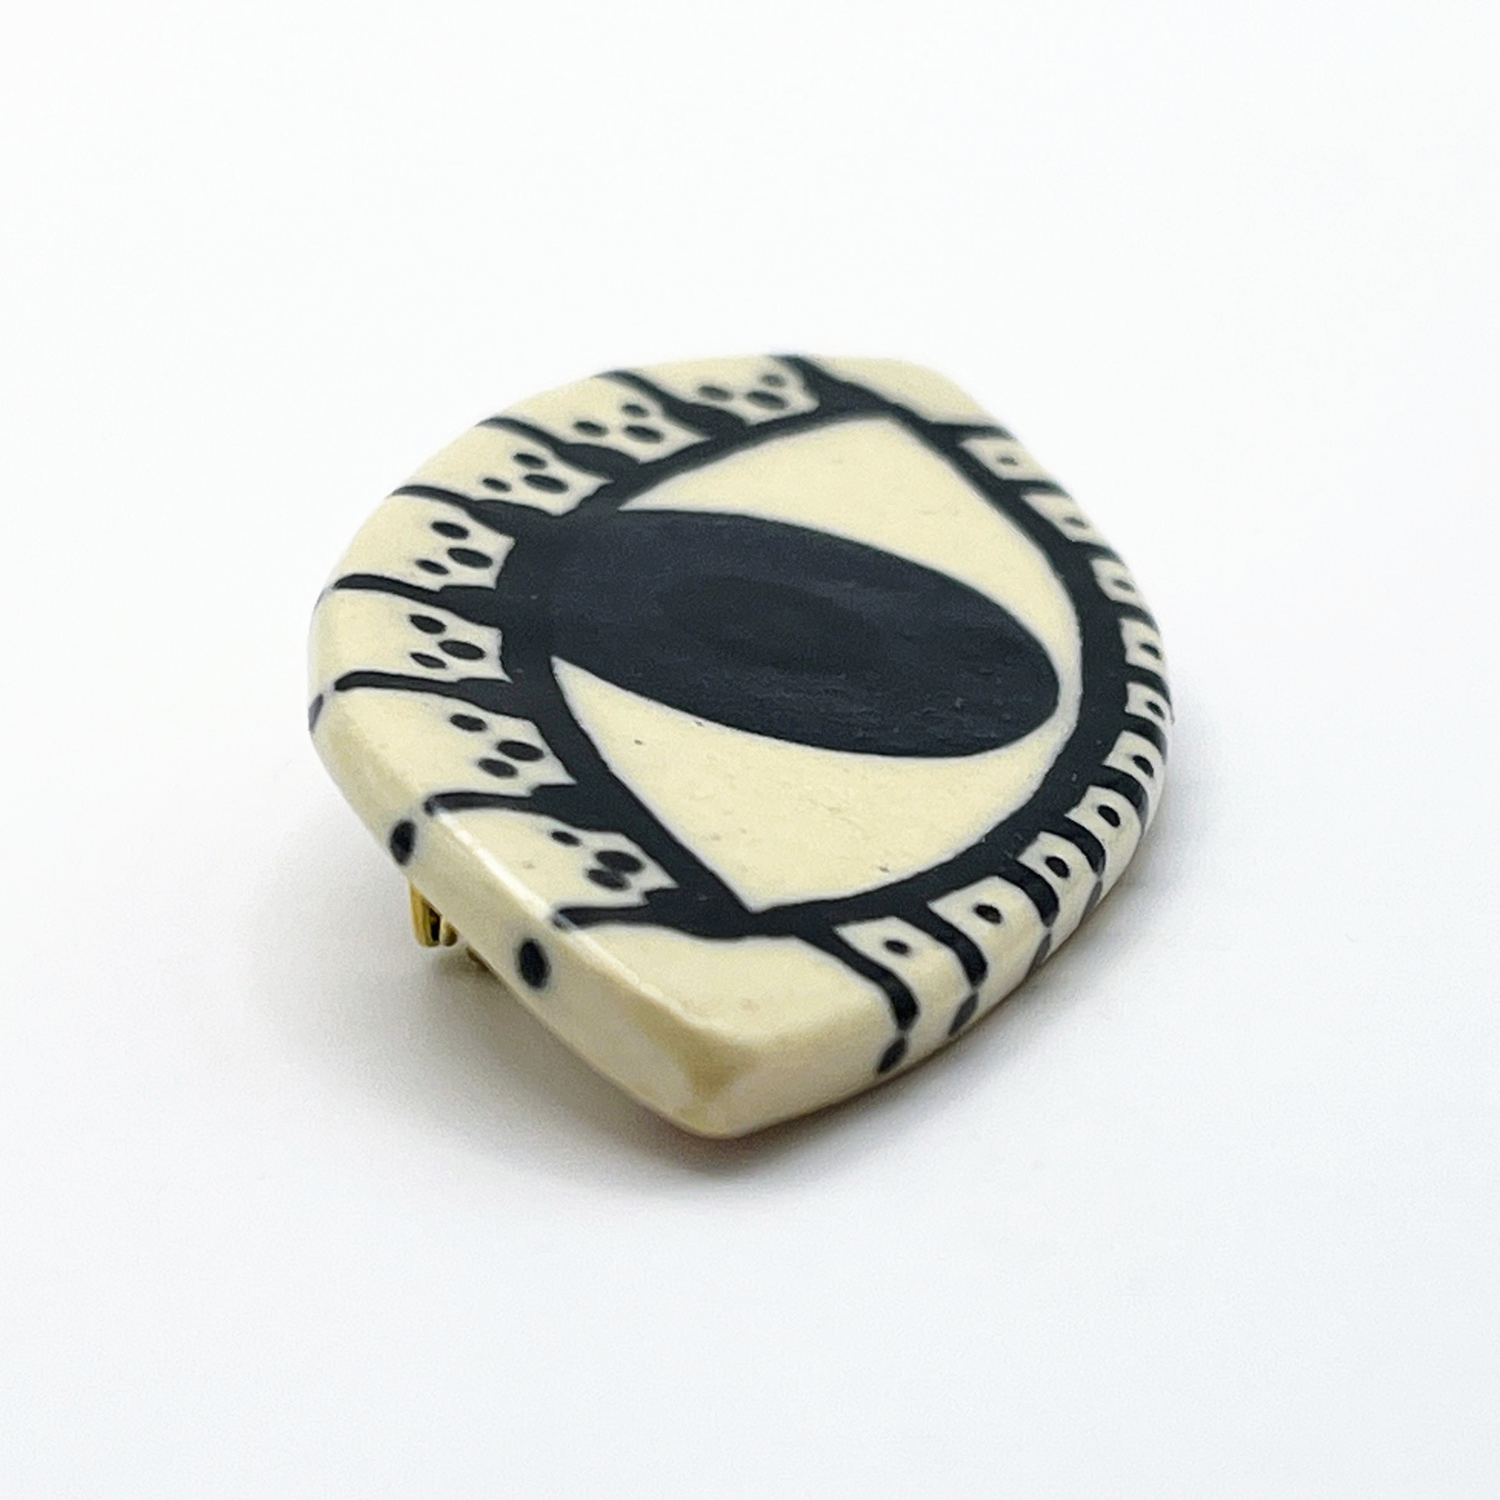 Here and Here: Green and Black Eye Brooch Product Image 2 of 2